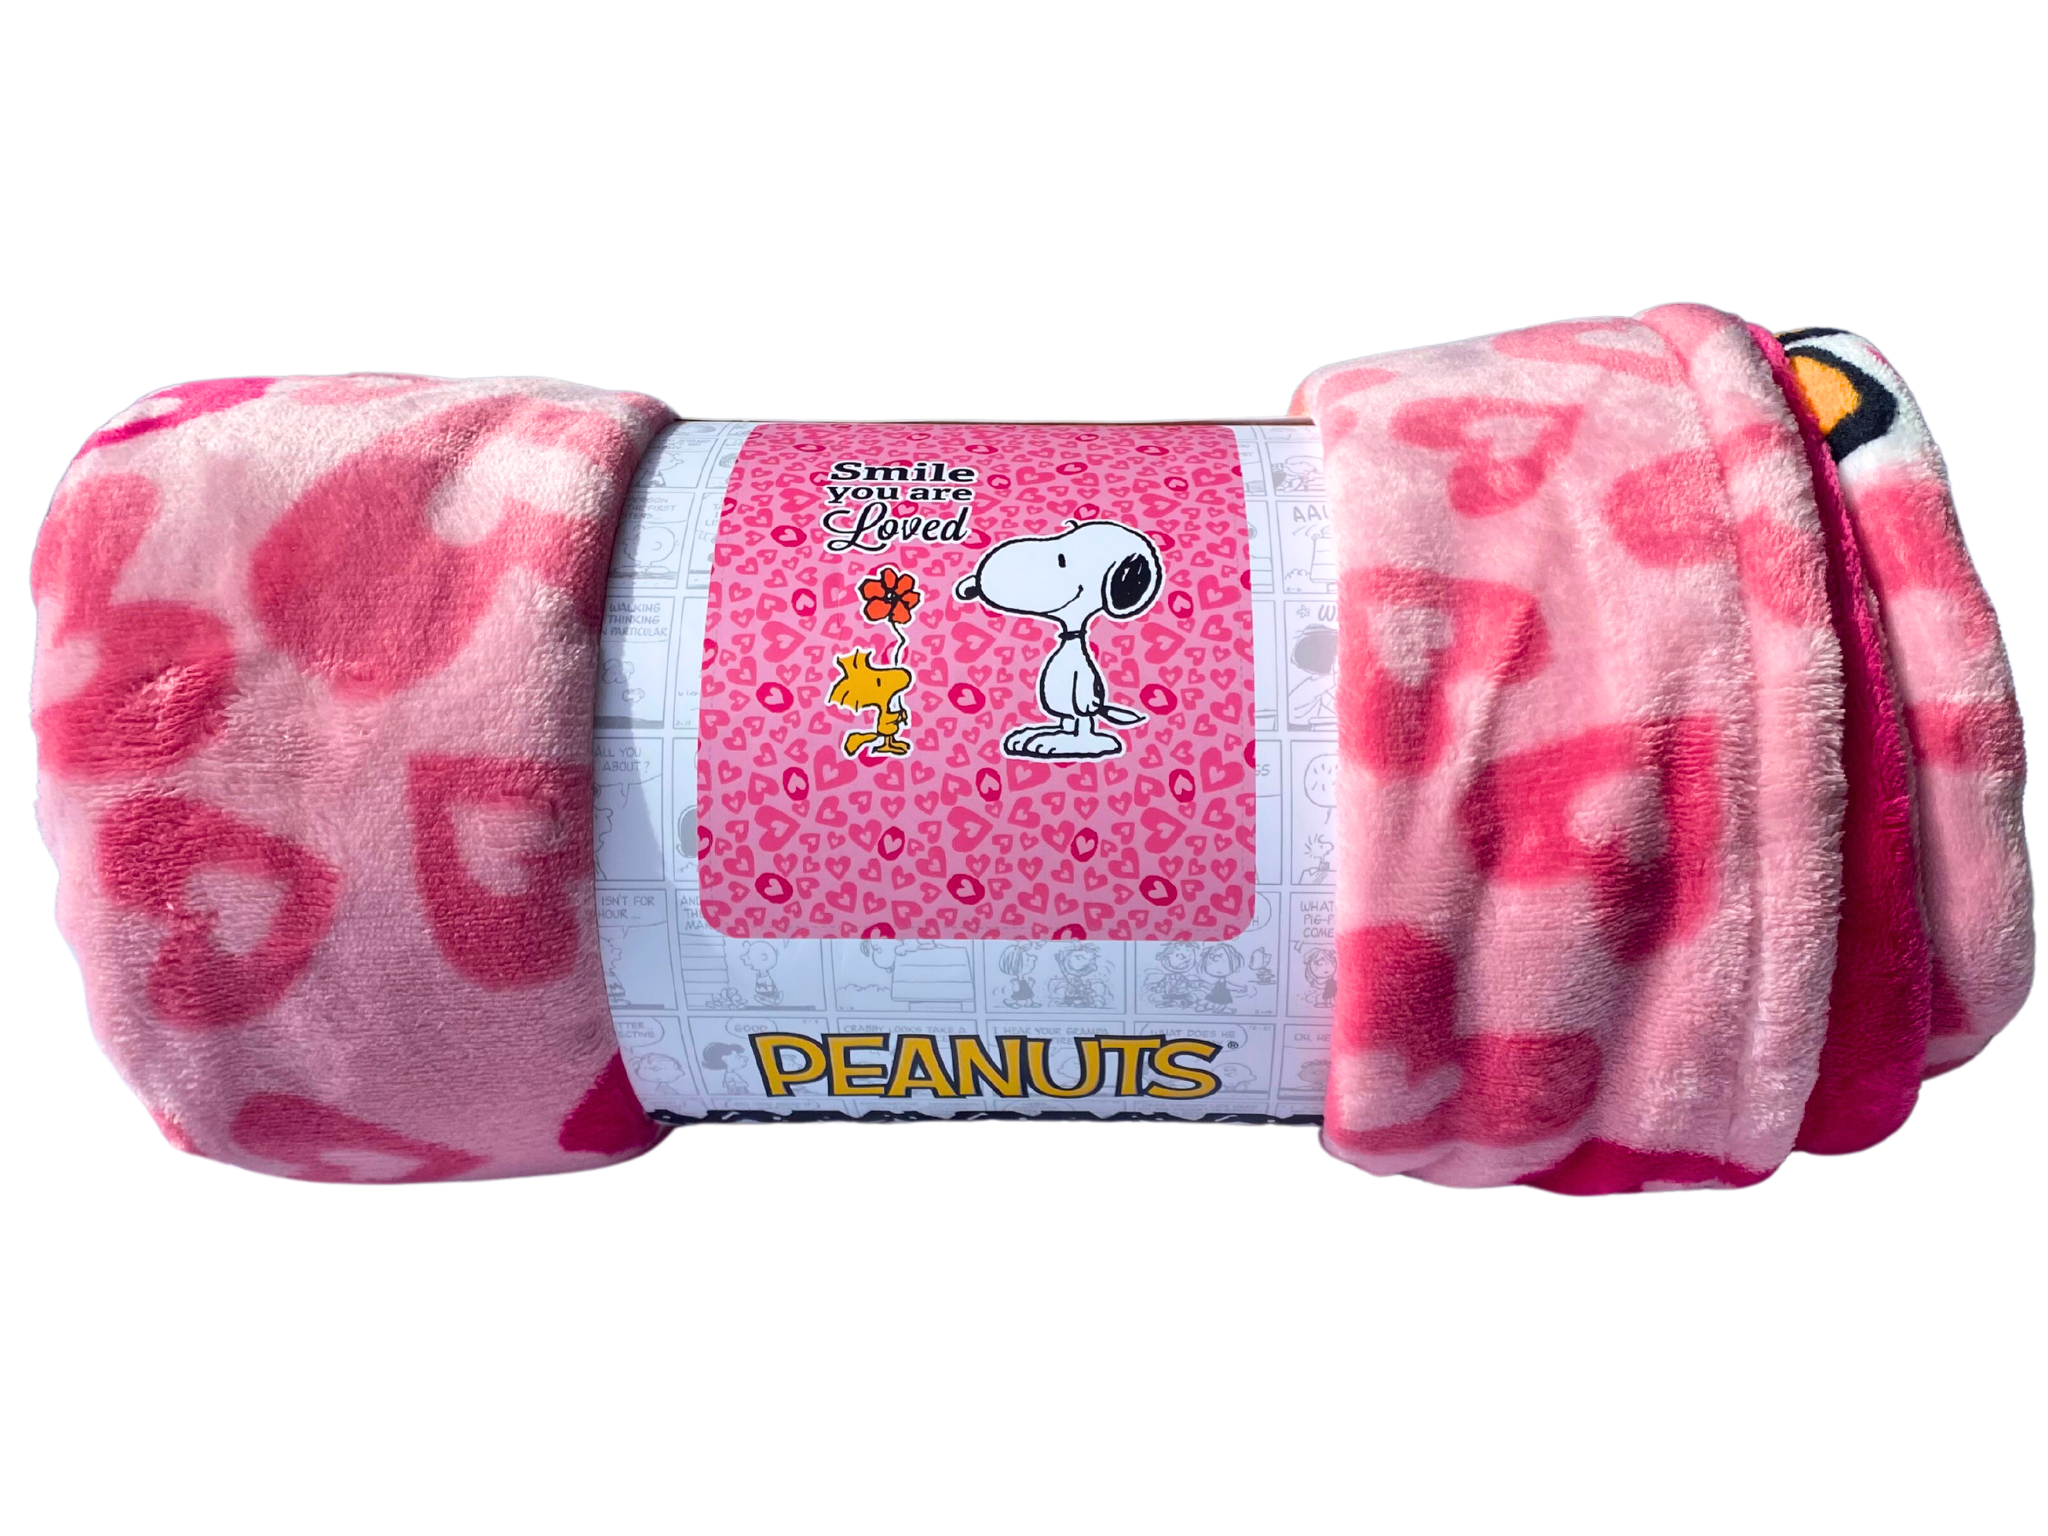 SNUGGLE BUTTS Snoopy Smile You are Loved Plush Throw Blanket Bundle